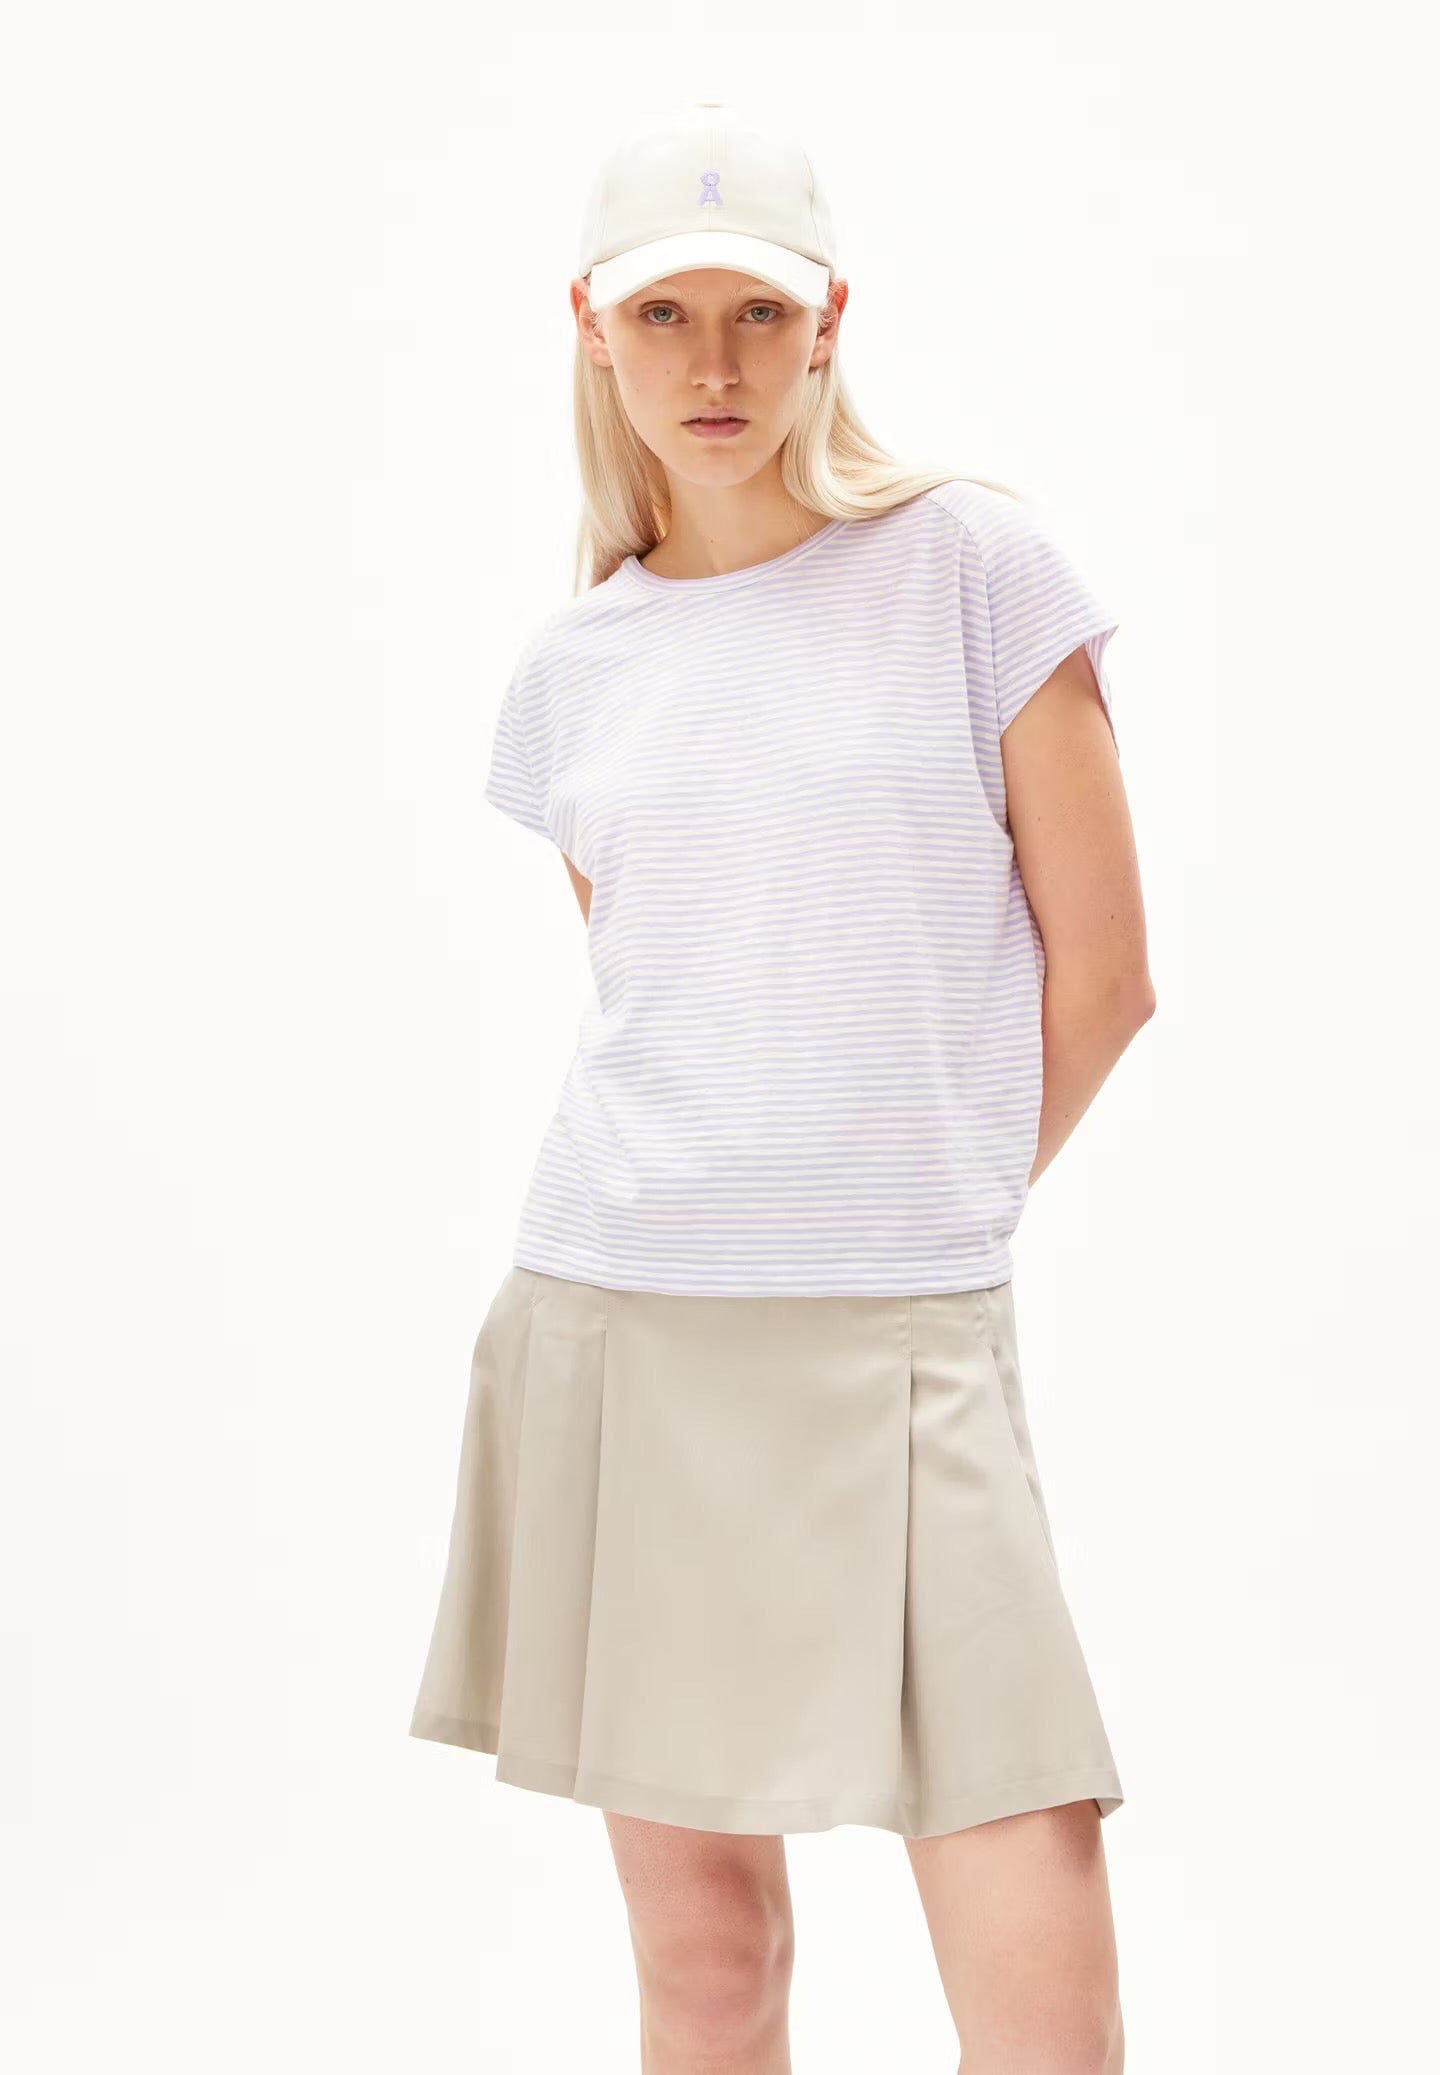 Loose fit striped t-shirt from Armedangels, with cap sleeves and a round neck, fine horizontal stripes in oat milk white and light lavender, made from sustainable organic cotton.